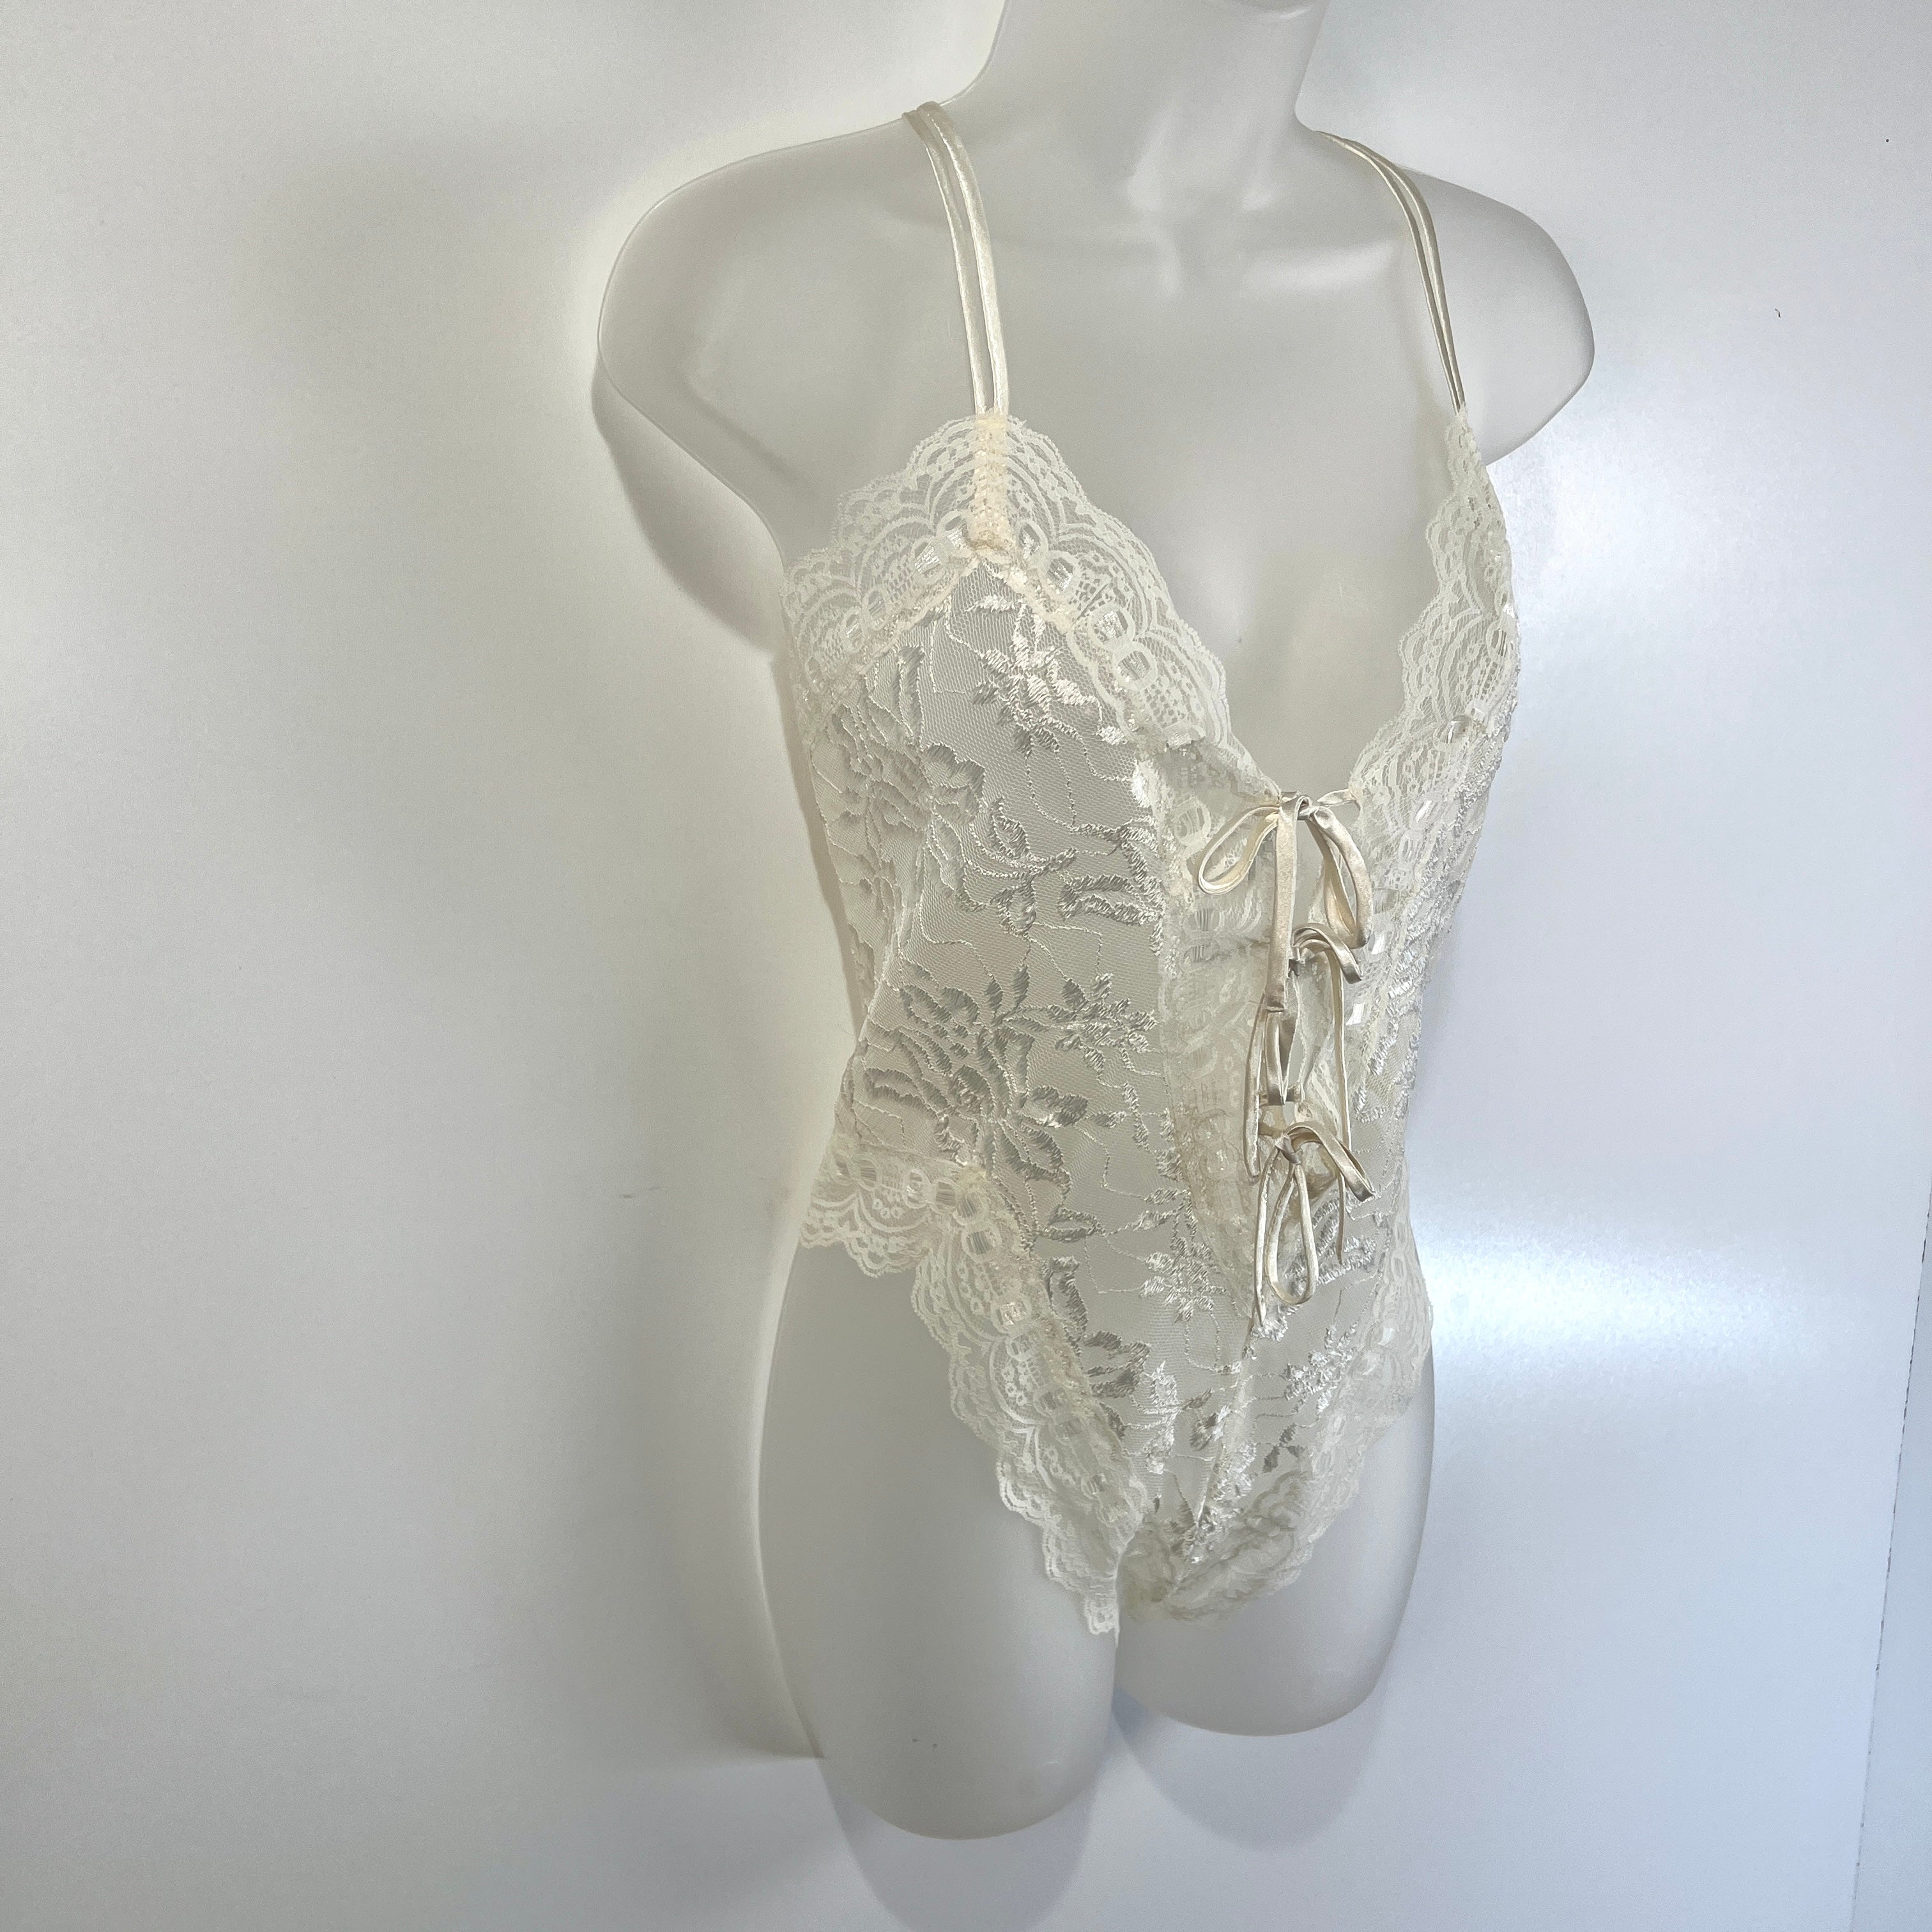 Vintage 90s White Stretch Lace Bodysuit Wedding Gold Label By